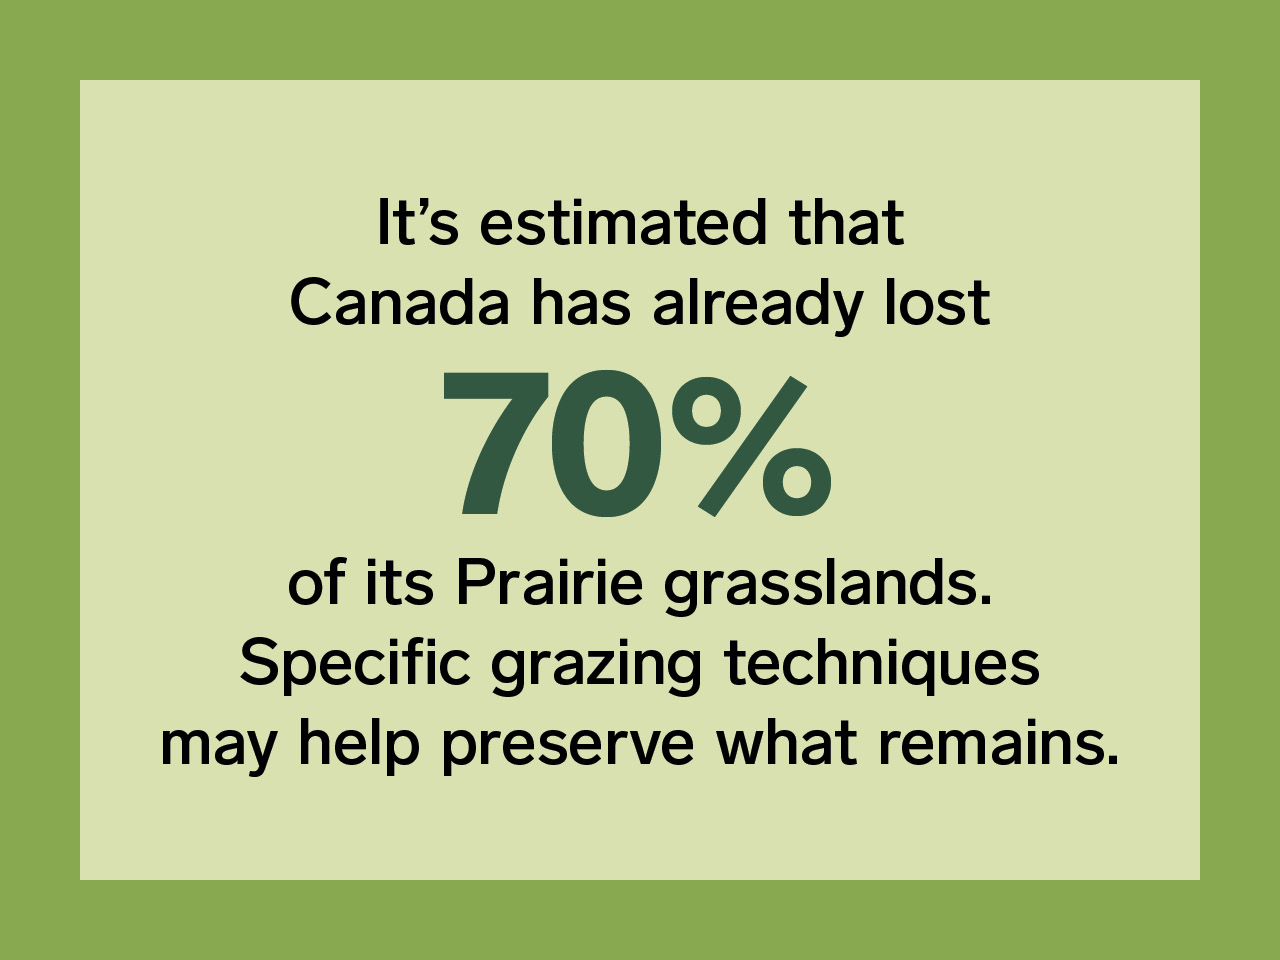 Green graphic with text explaining that Canada has lost 70% of its Prairie grasslands.